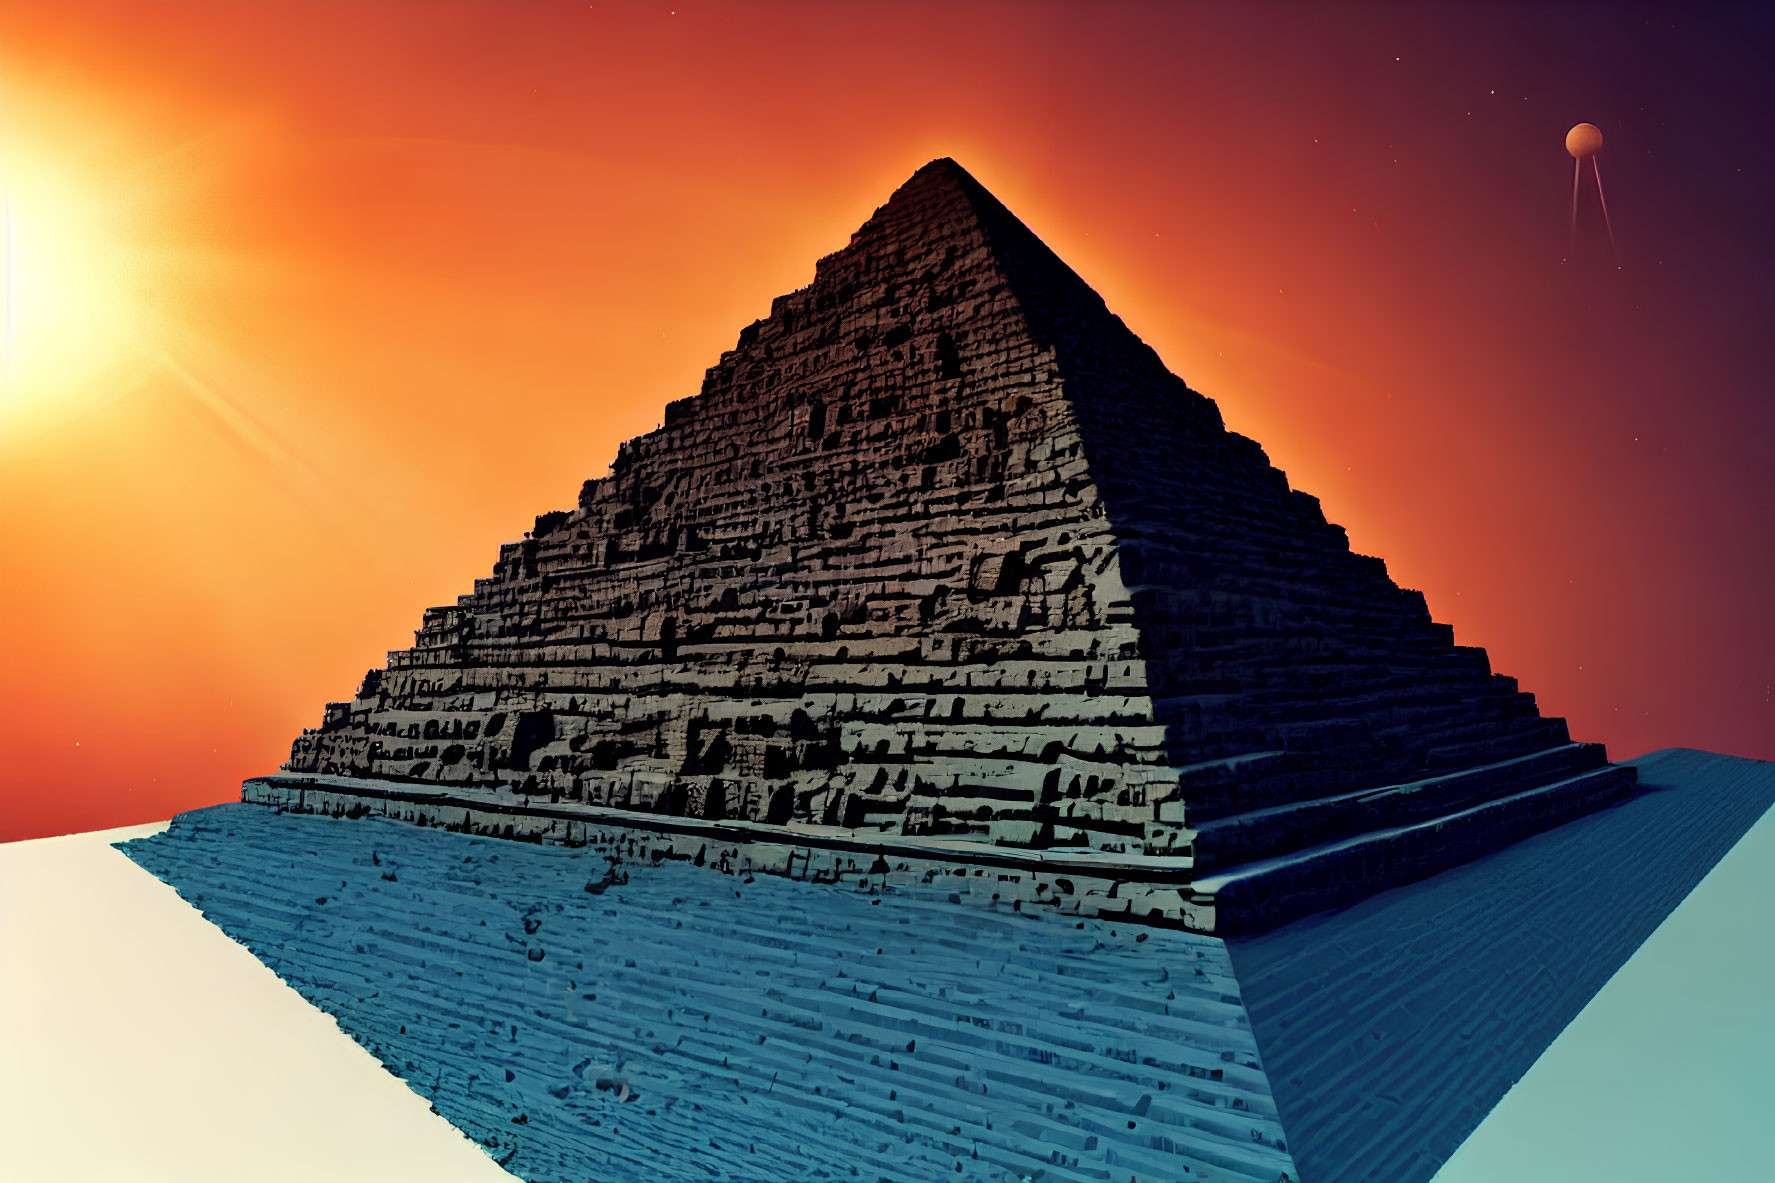 Ancient pyramid under dramatic orange sky with setting sun and distant planet.